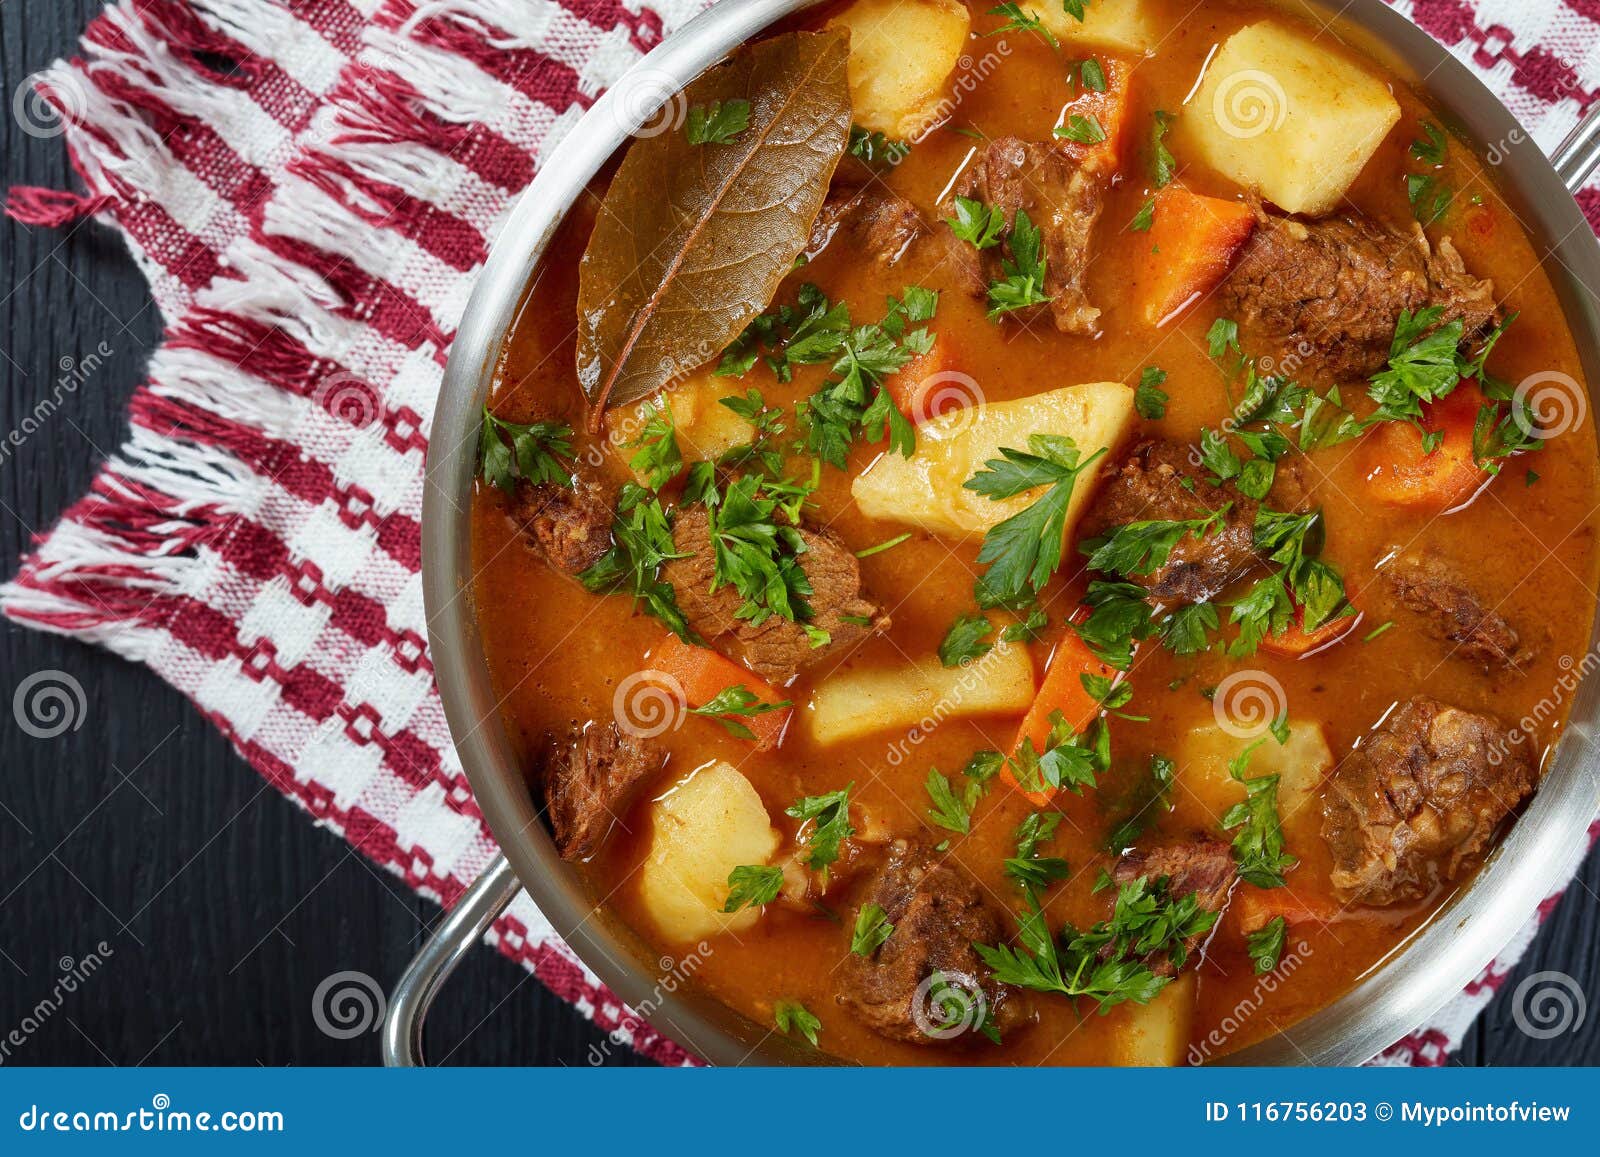 delicious braised beef with potato and carrots